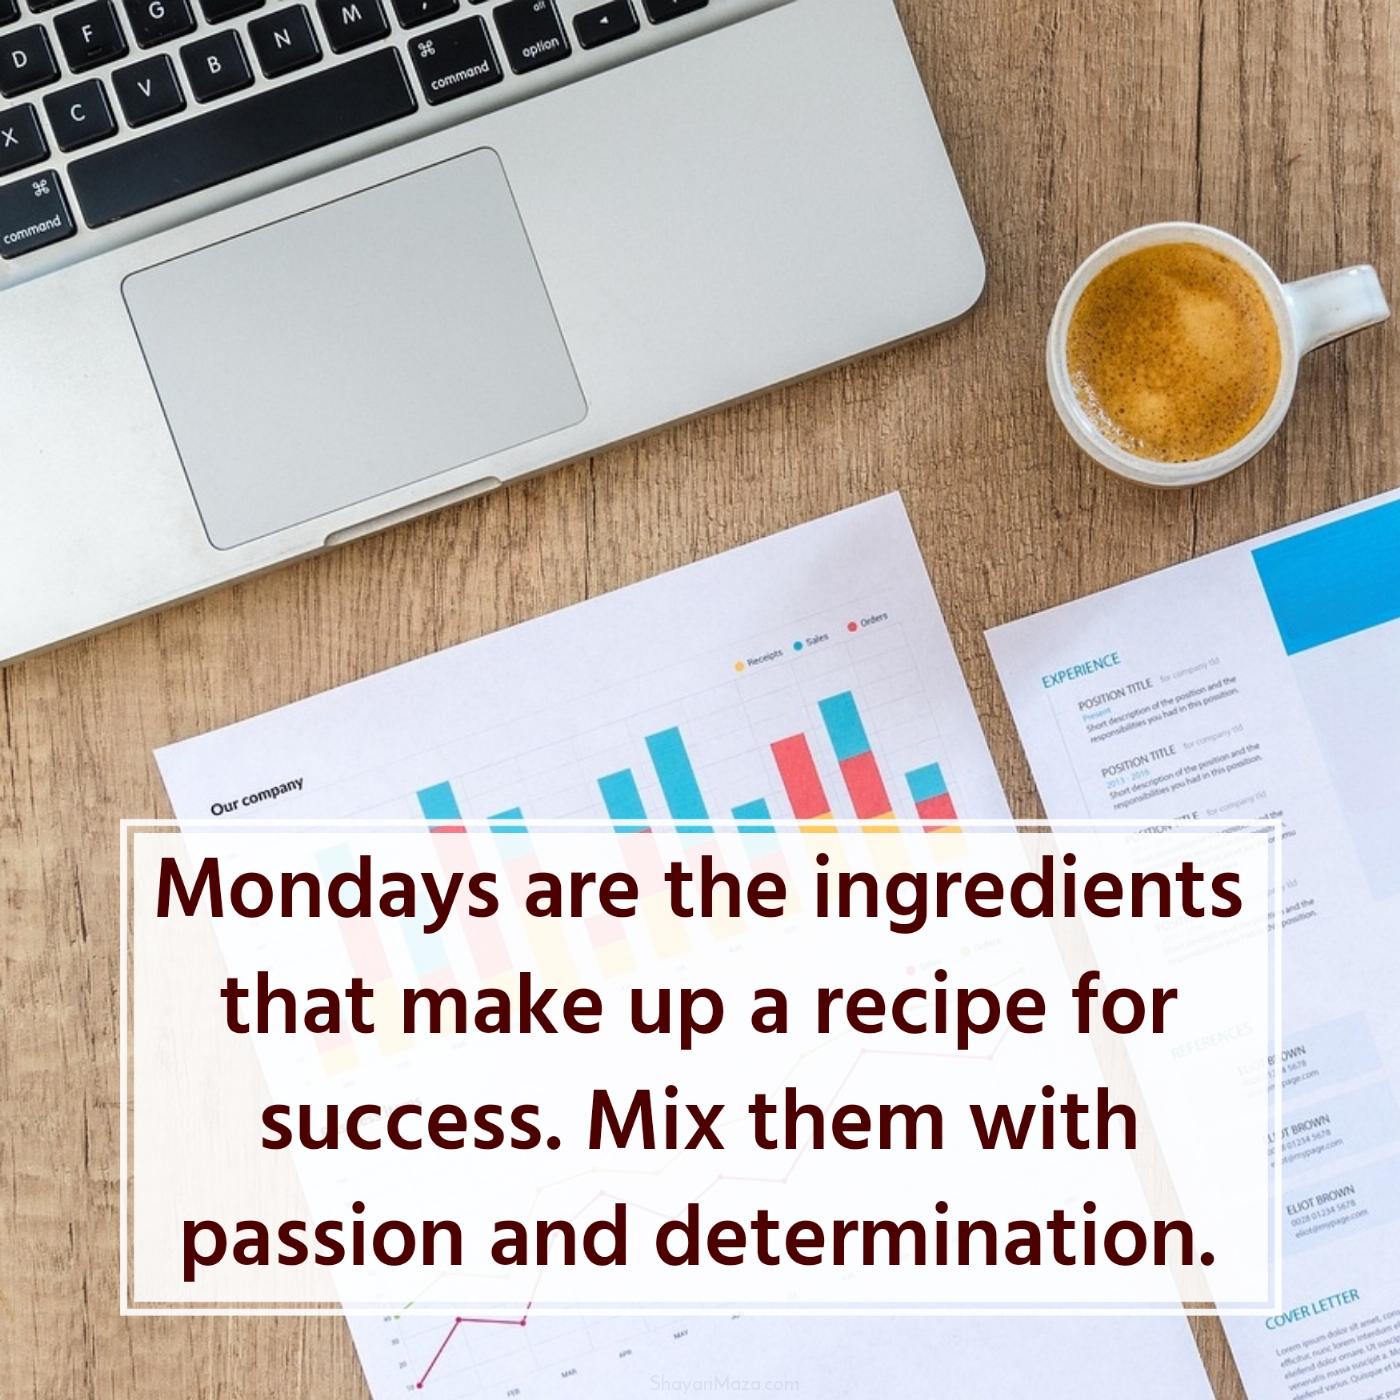 Mondays are the ingredients that make up a recipe for success